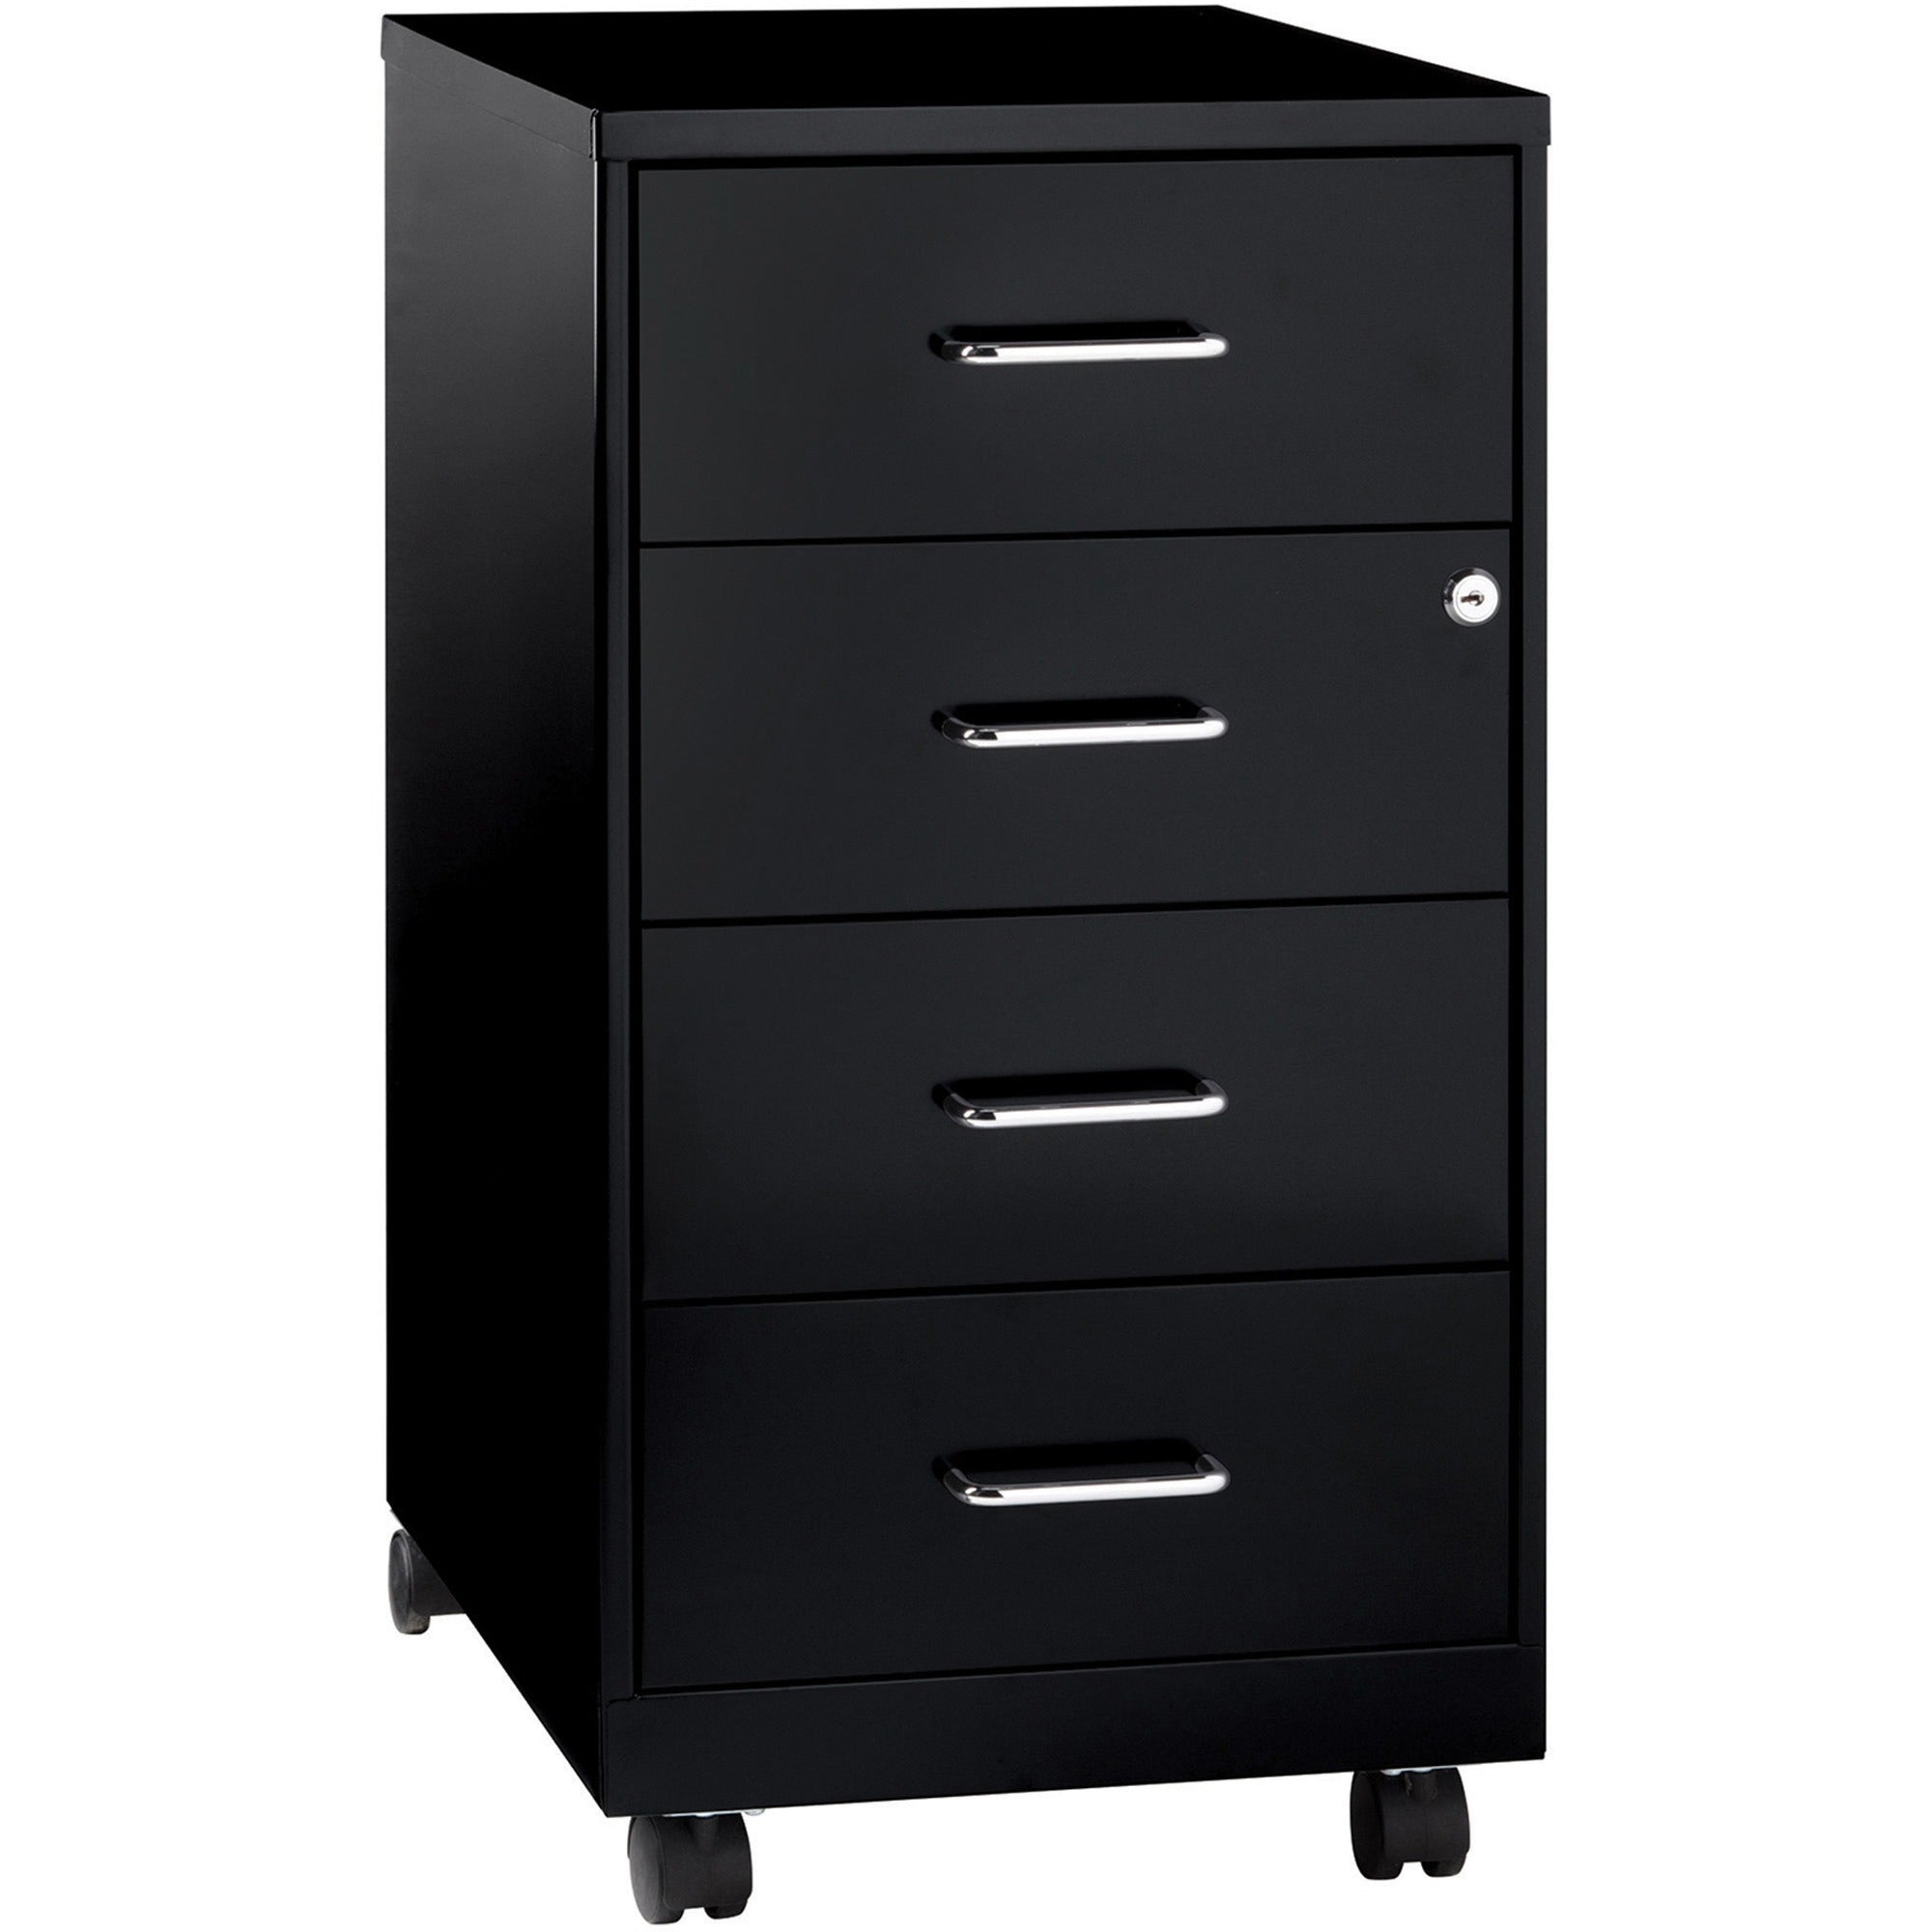 nusparc-mobile-storage-cabinet-142-x-18-x-265-4-x-drawers-letter-legal-mobility-glide-suspension-anti-tip-nonporous-surface-cam-lock-3-4-drawer-extension-black-painted-steel-recycled-assembly-required_nprvf418dmbk - 2